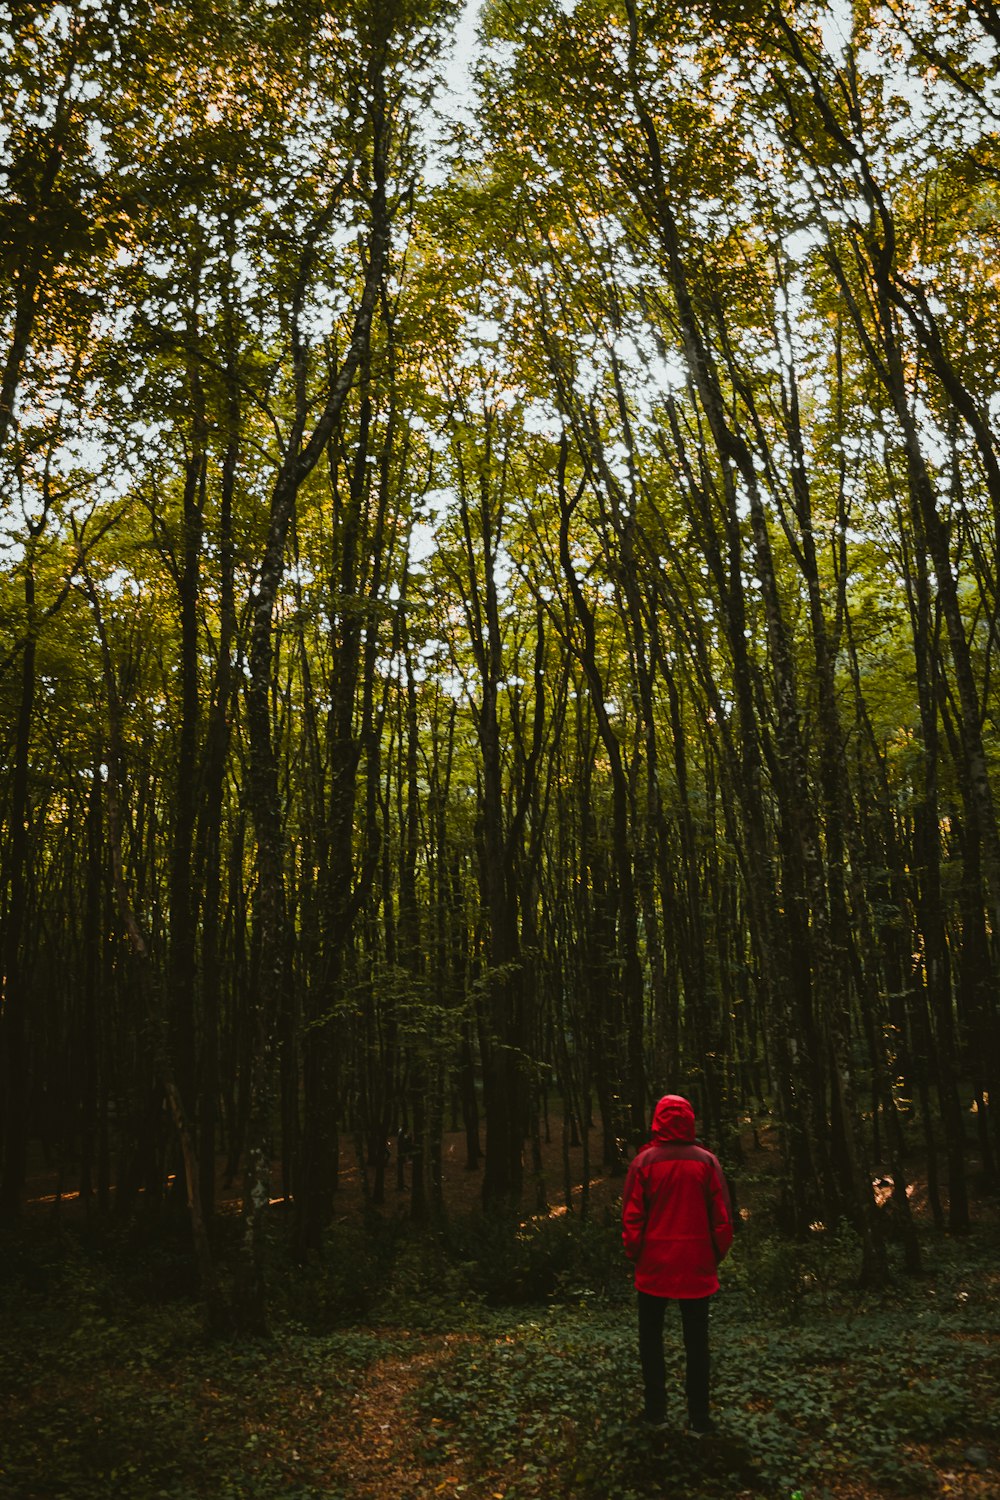 person wearing red hooded jacket standing near trees